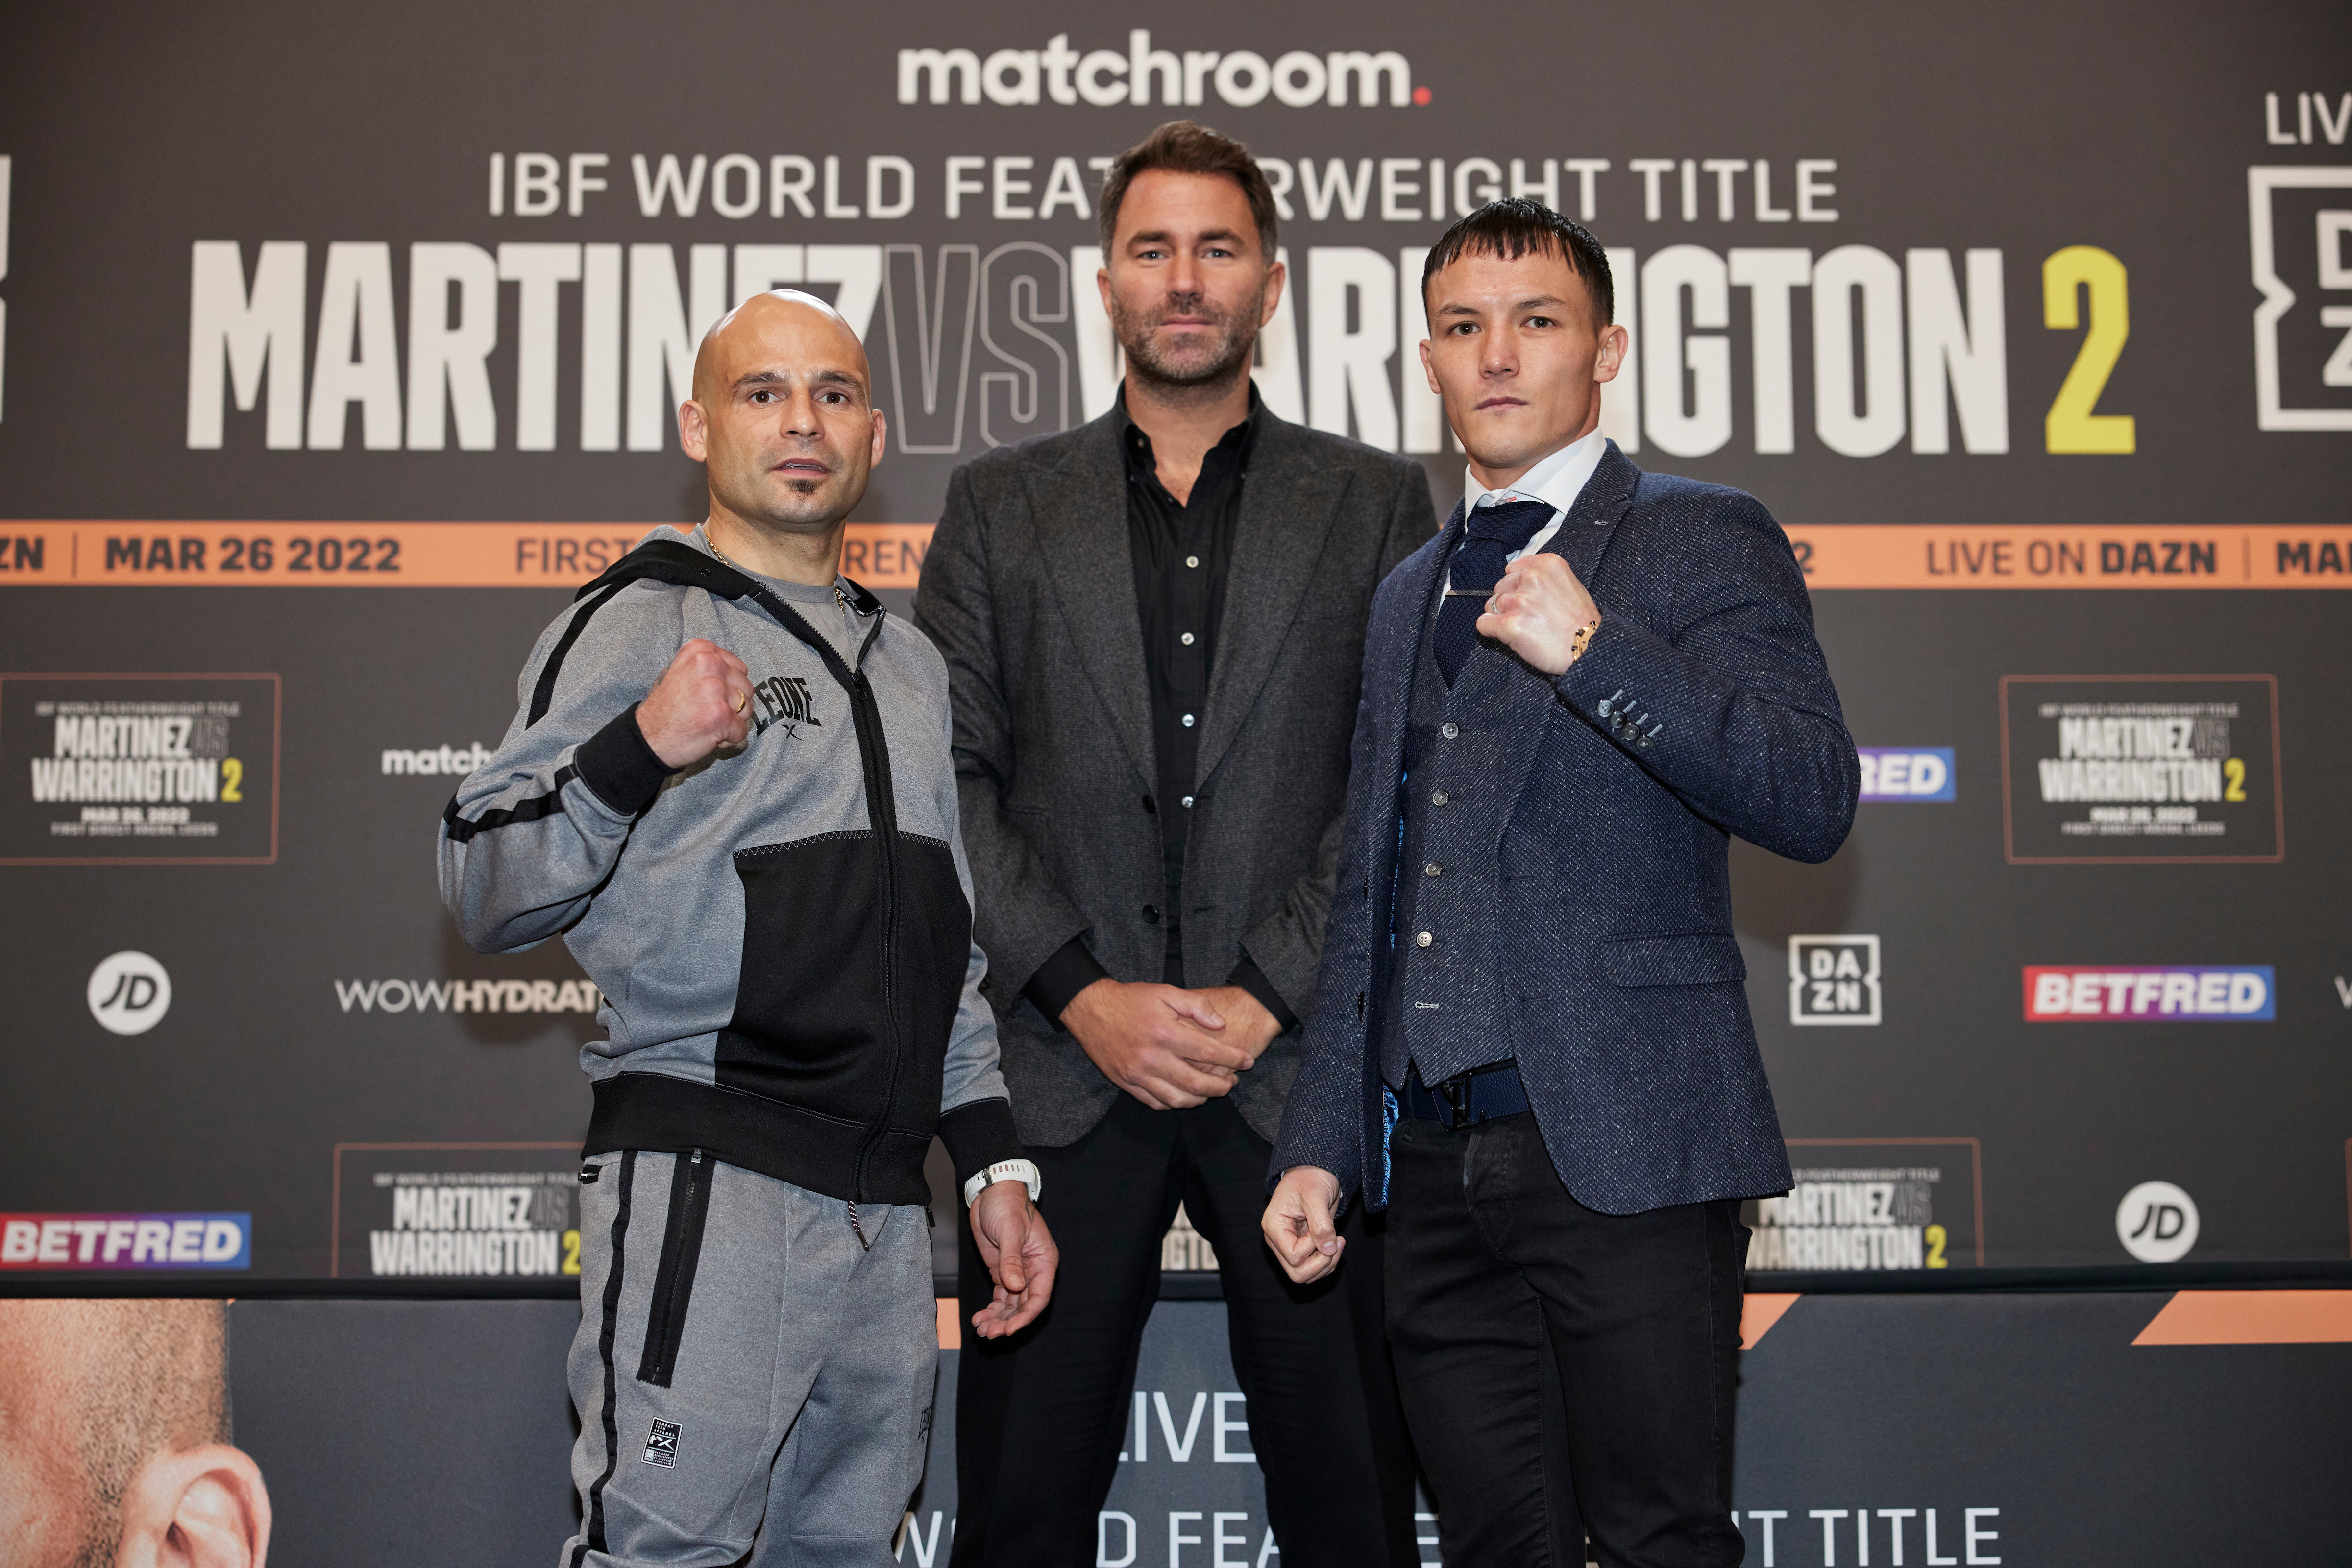 Kiko Martinez and Josh Warrington rematch five years after their first bout this week on DAZN.